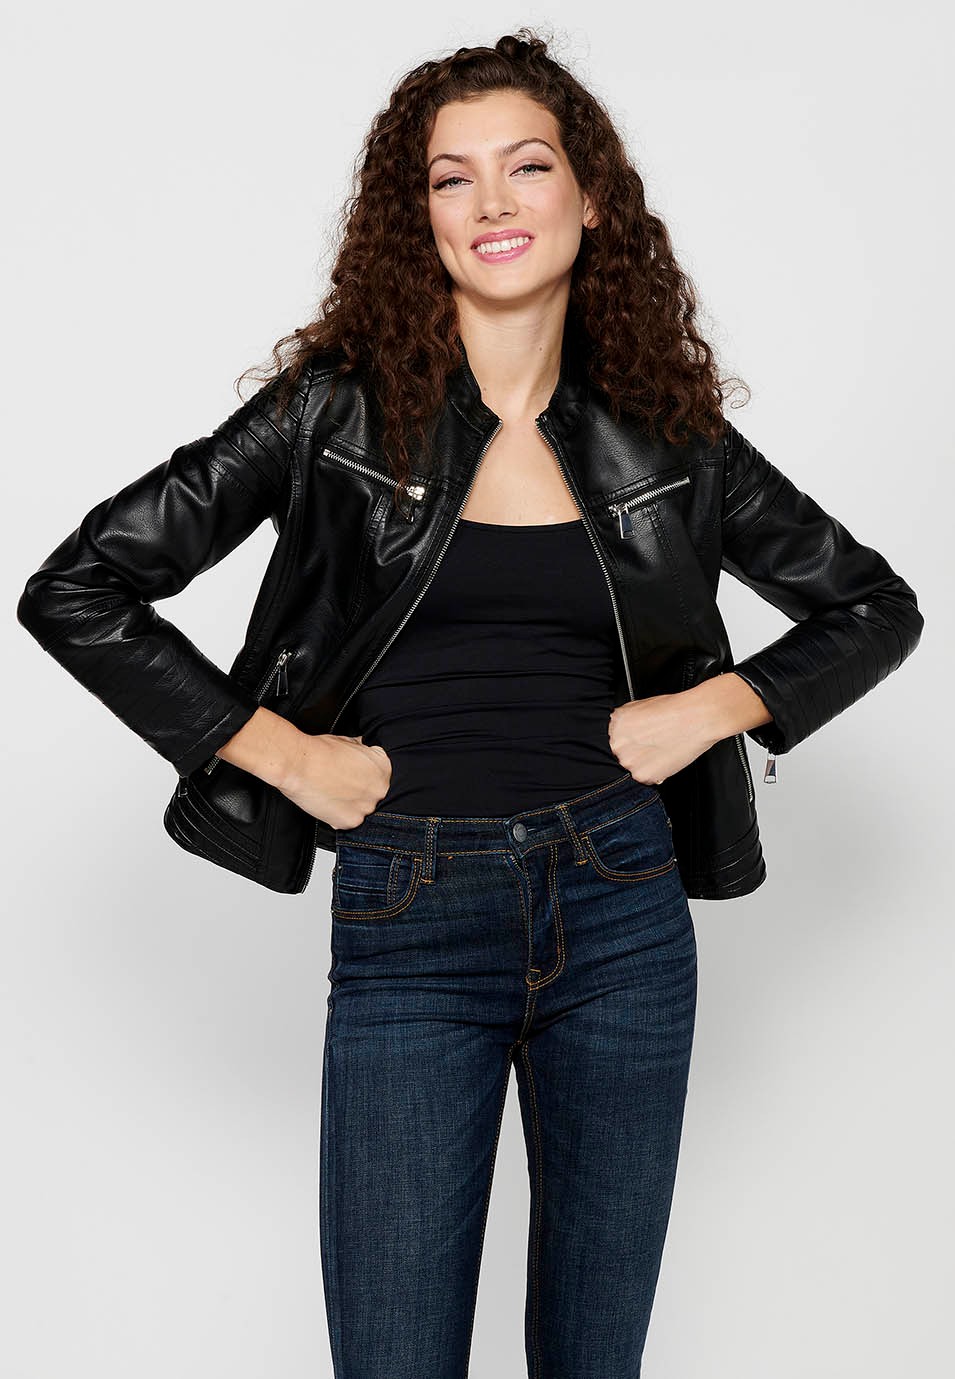 Long-sleeved jacket with zipper front closure and mandarin collar with details on the sleeves and shoulders in Black for Women 9